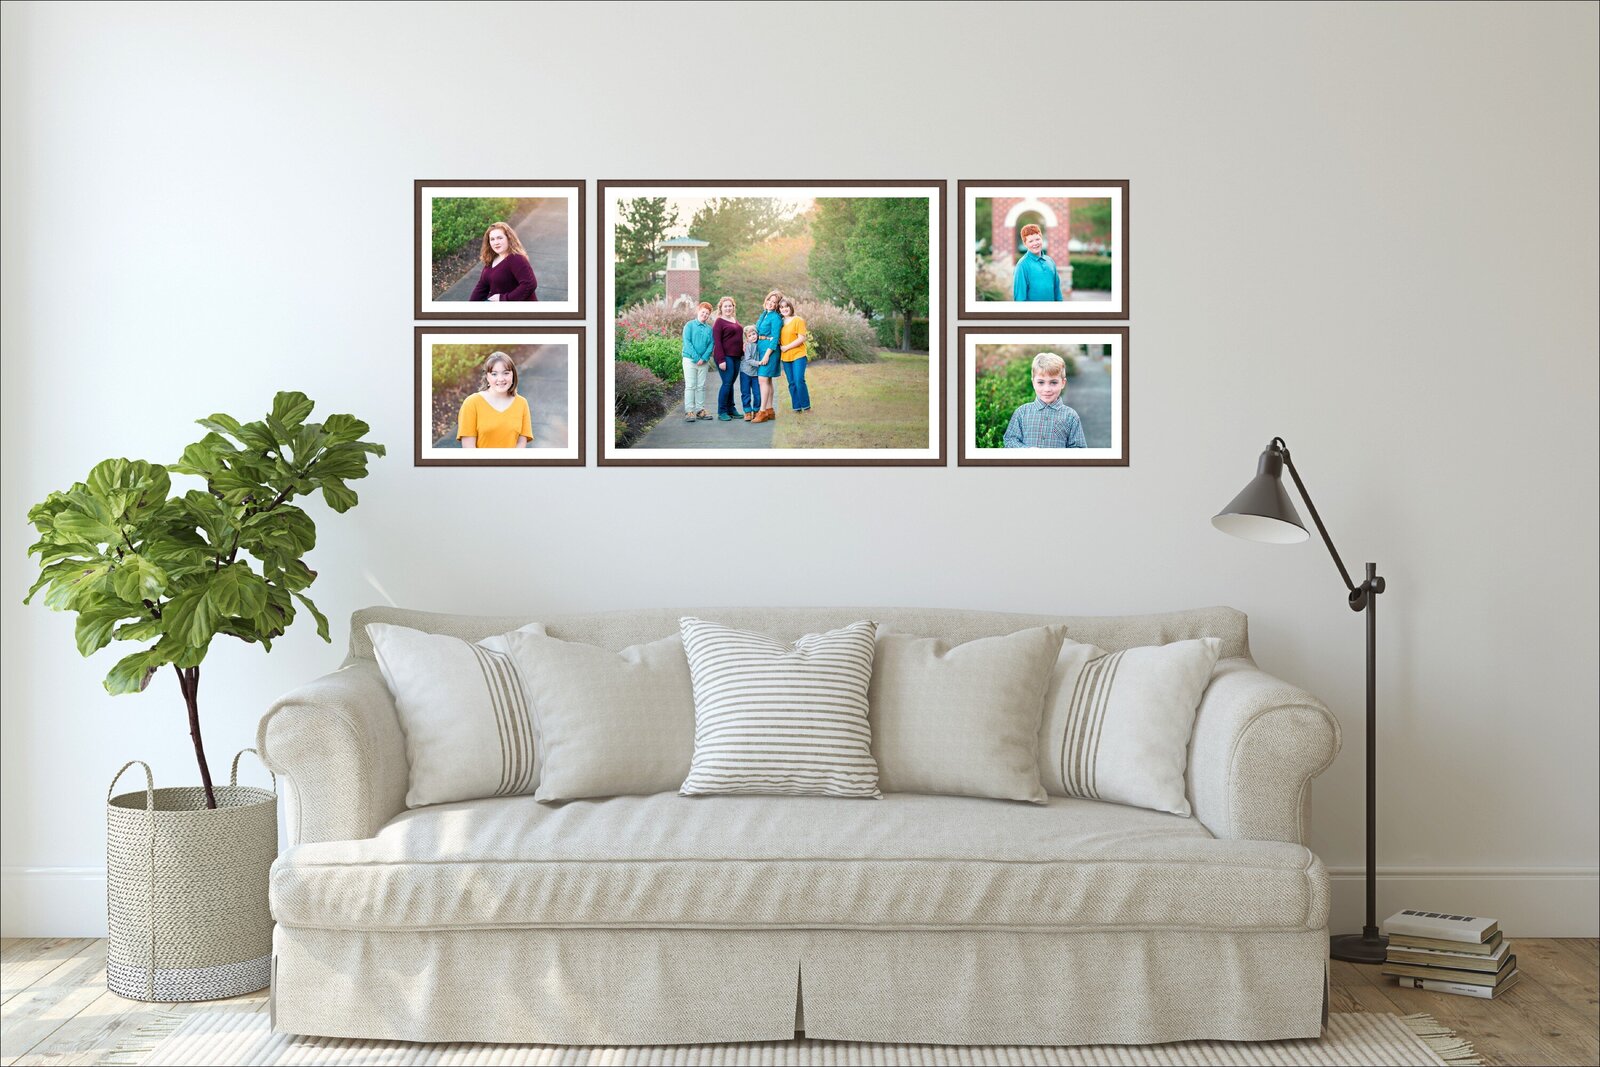 Family photo prints in a collage above a couch for a modern family living room design